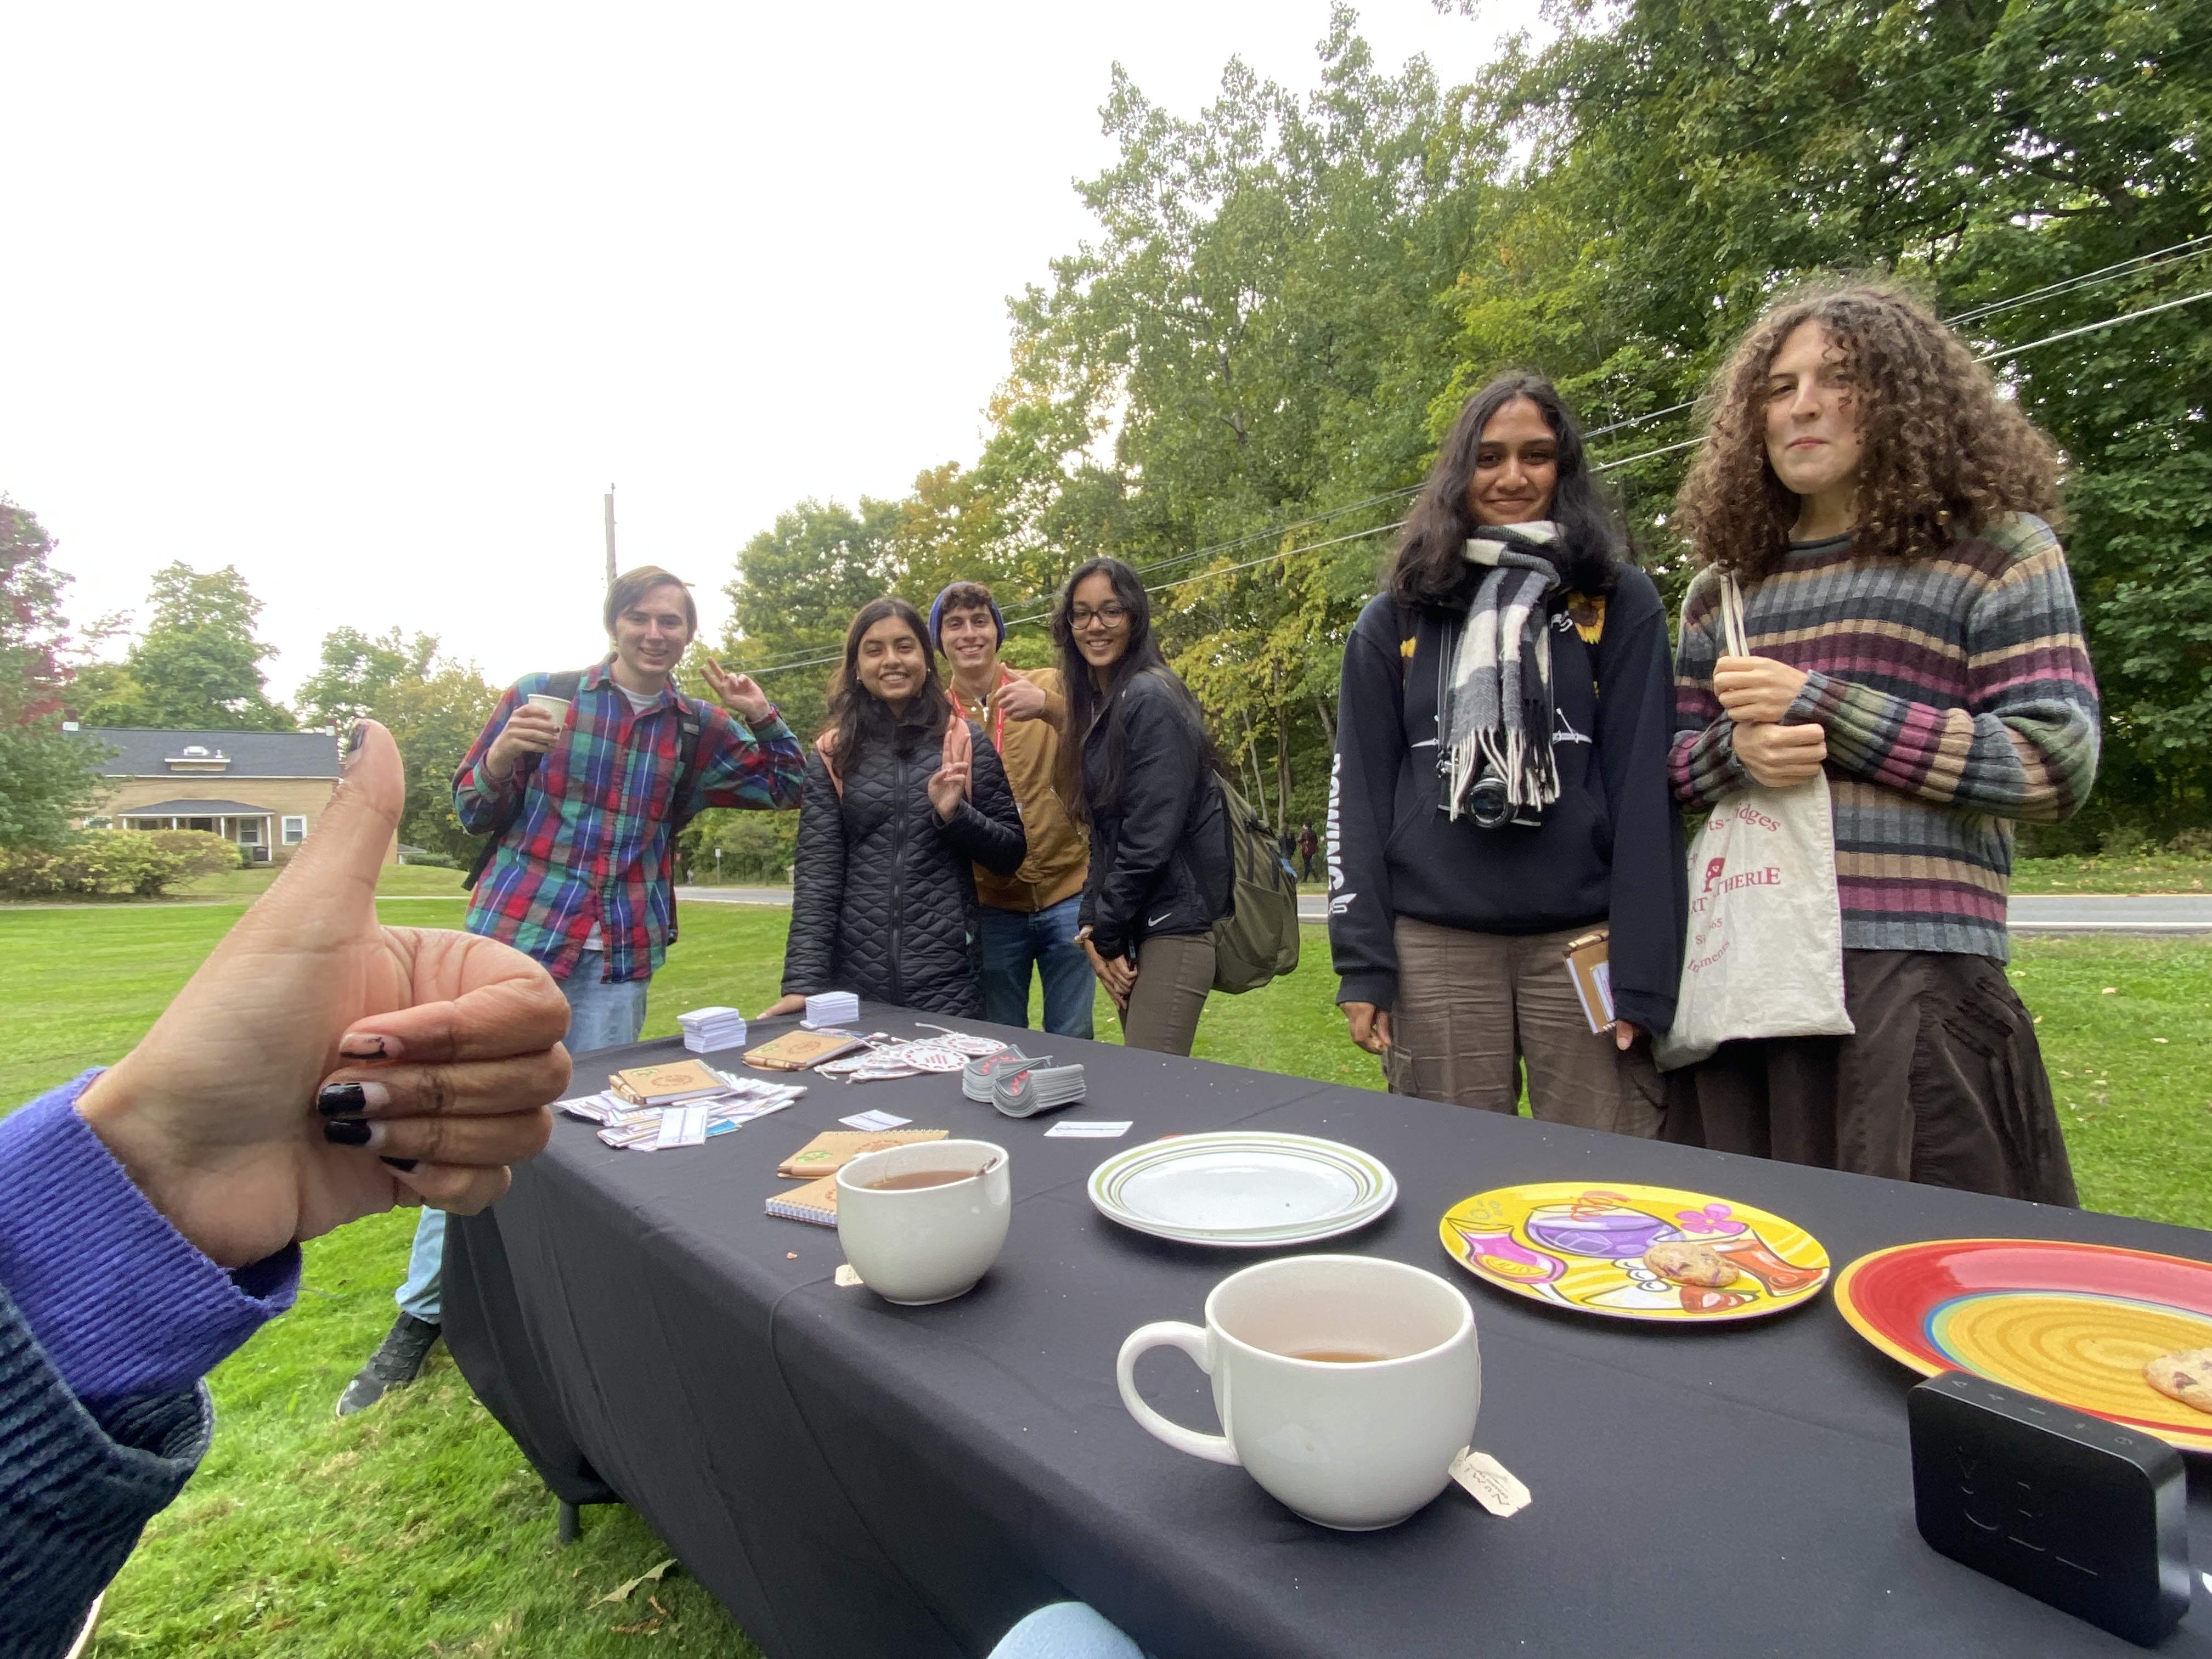 Cookies, Music, and Lawn Games! Get To Know OSUN Civic Engagement